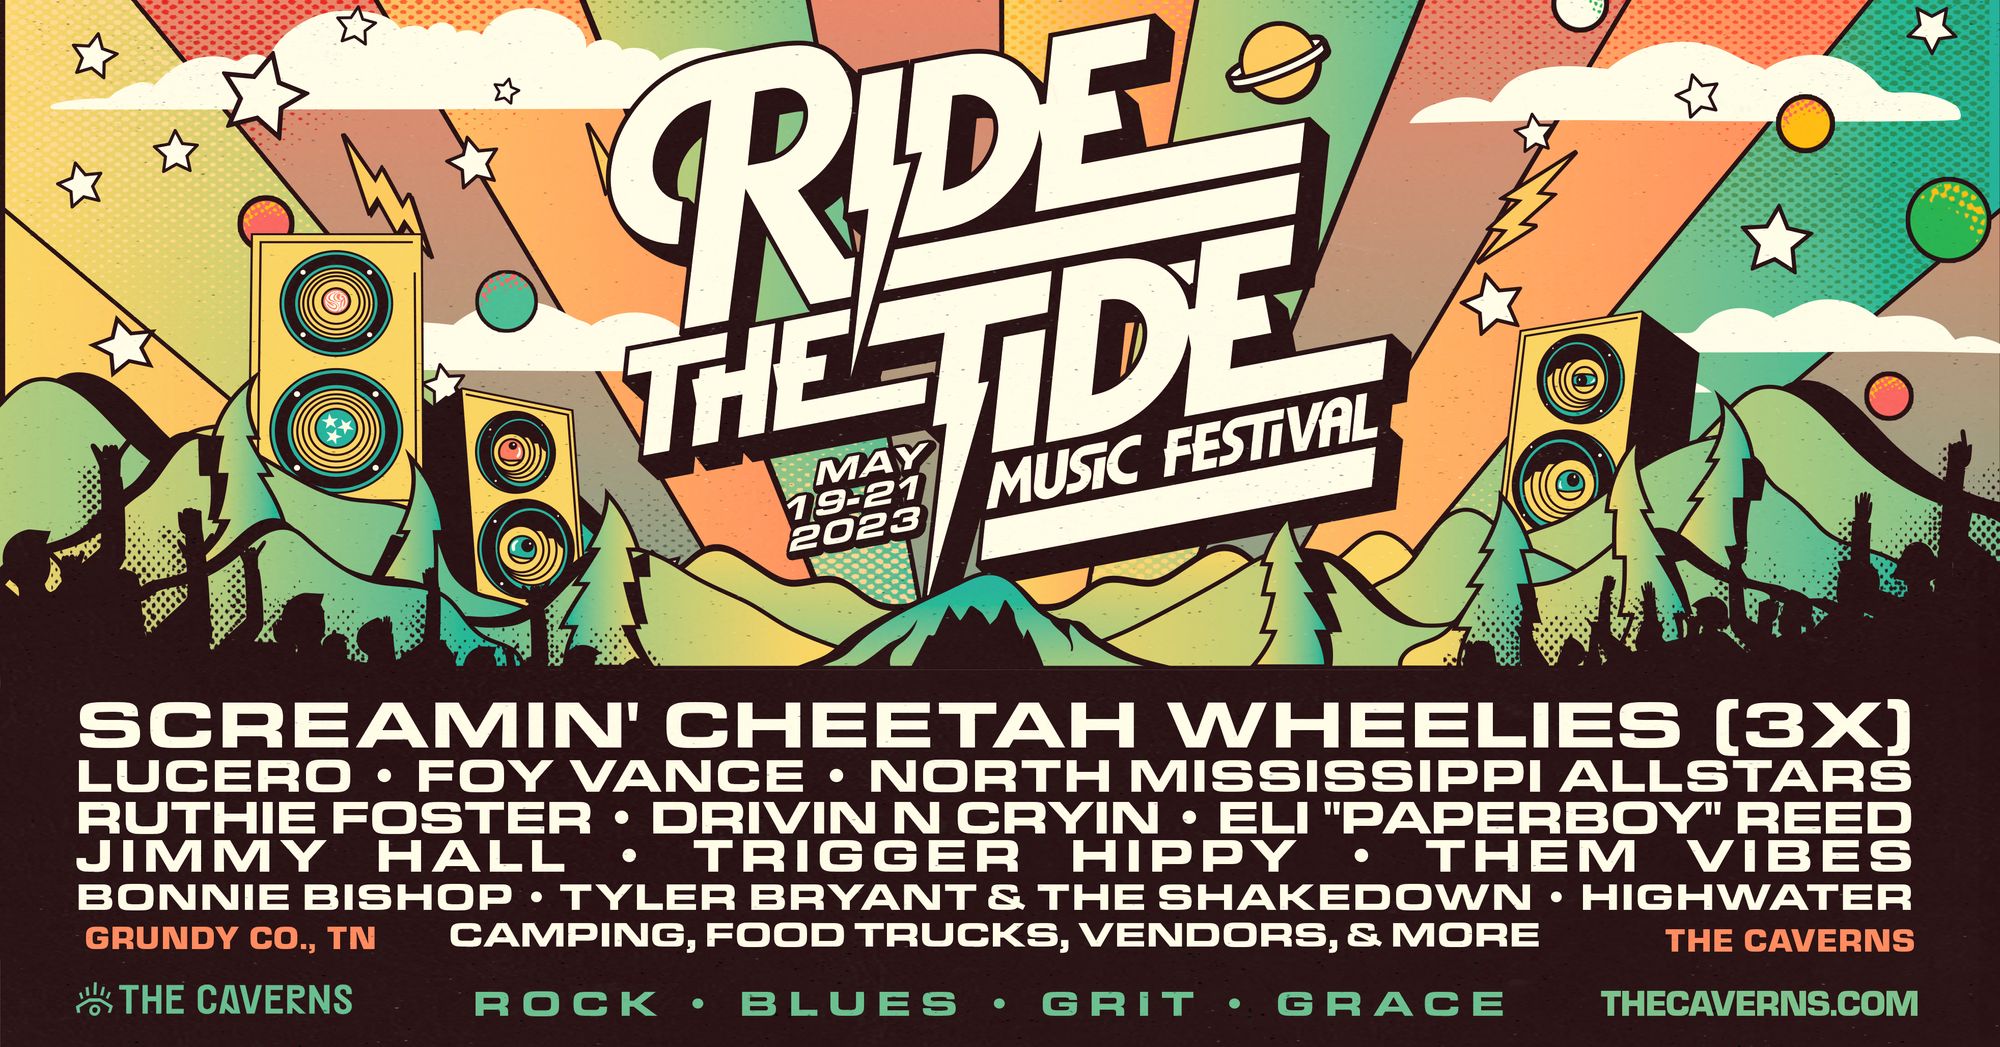 Ride The Tide Music Festival, May 1921, 2023 The Caverns